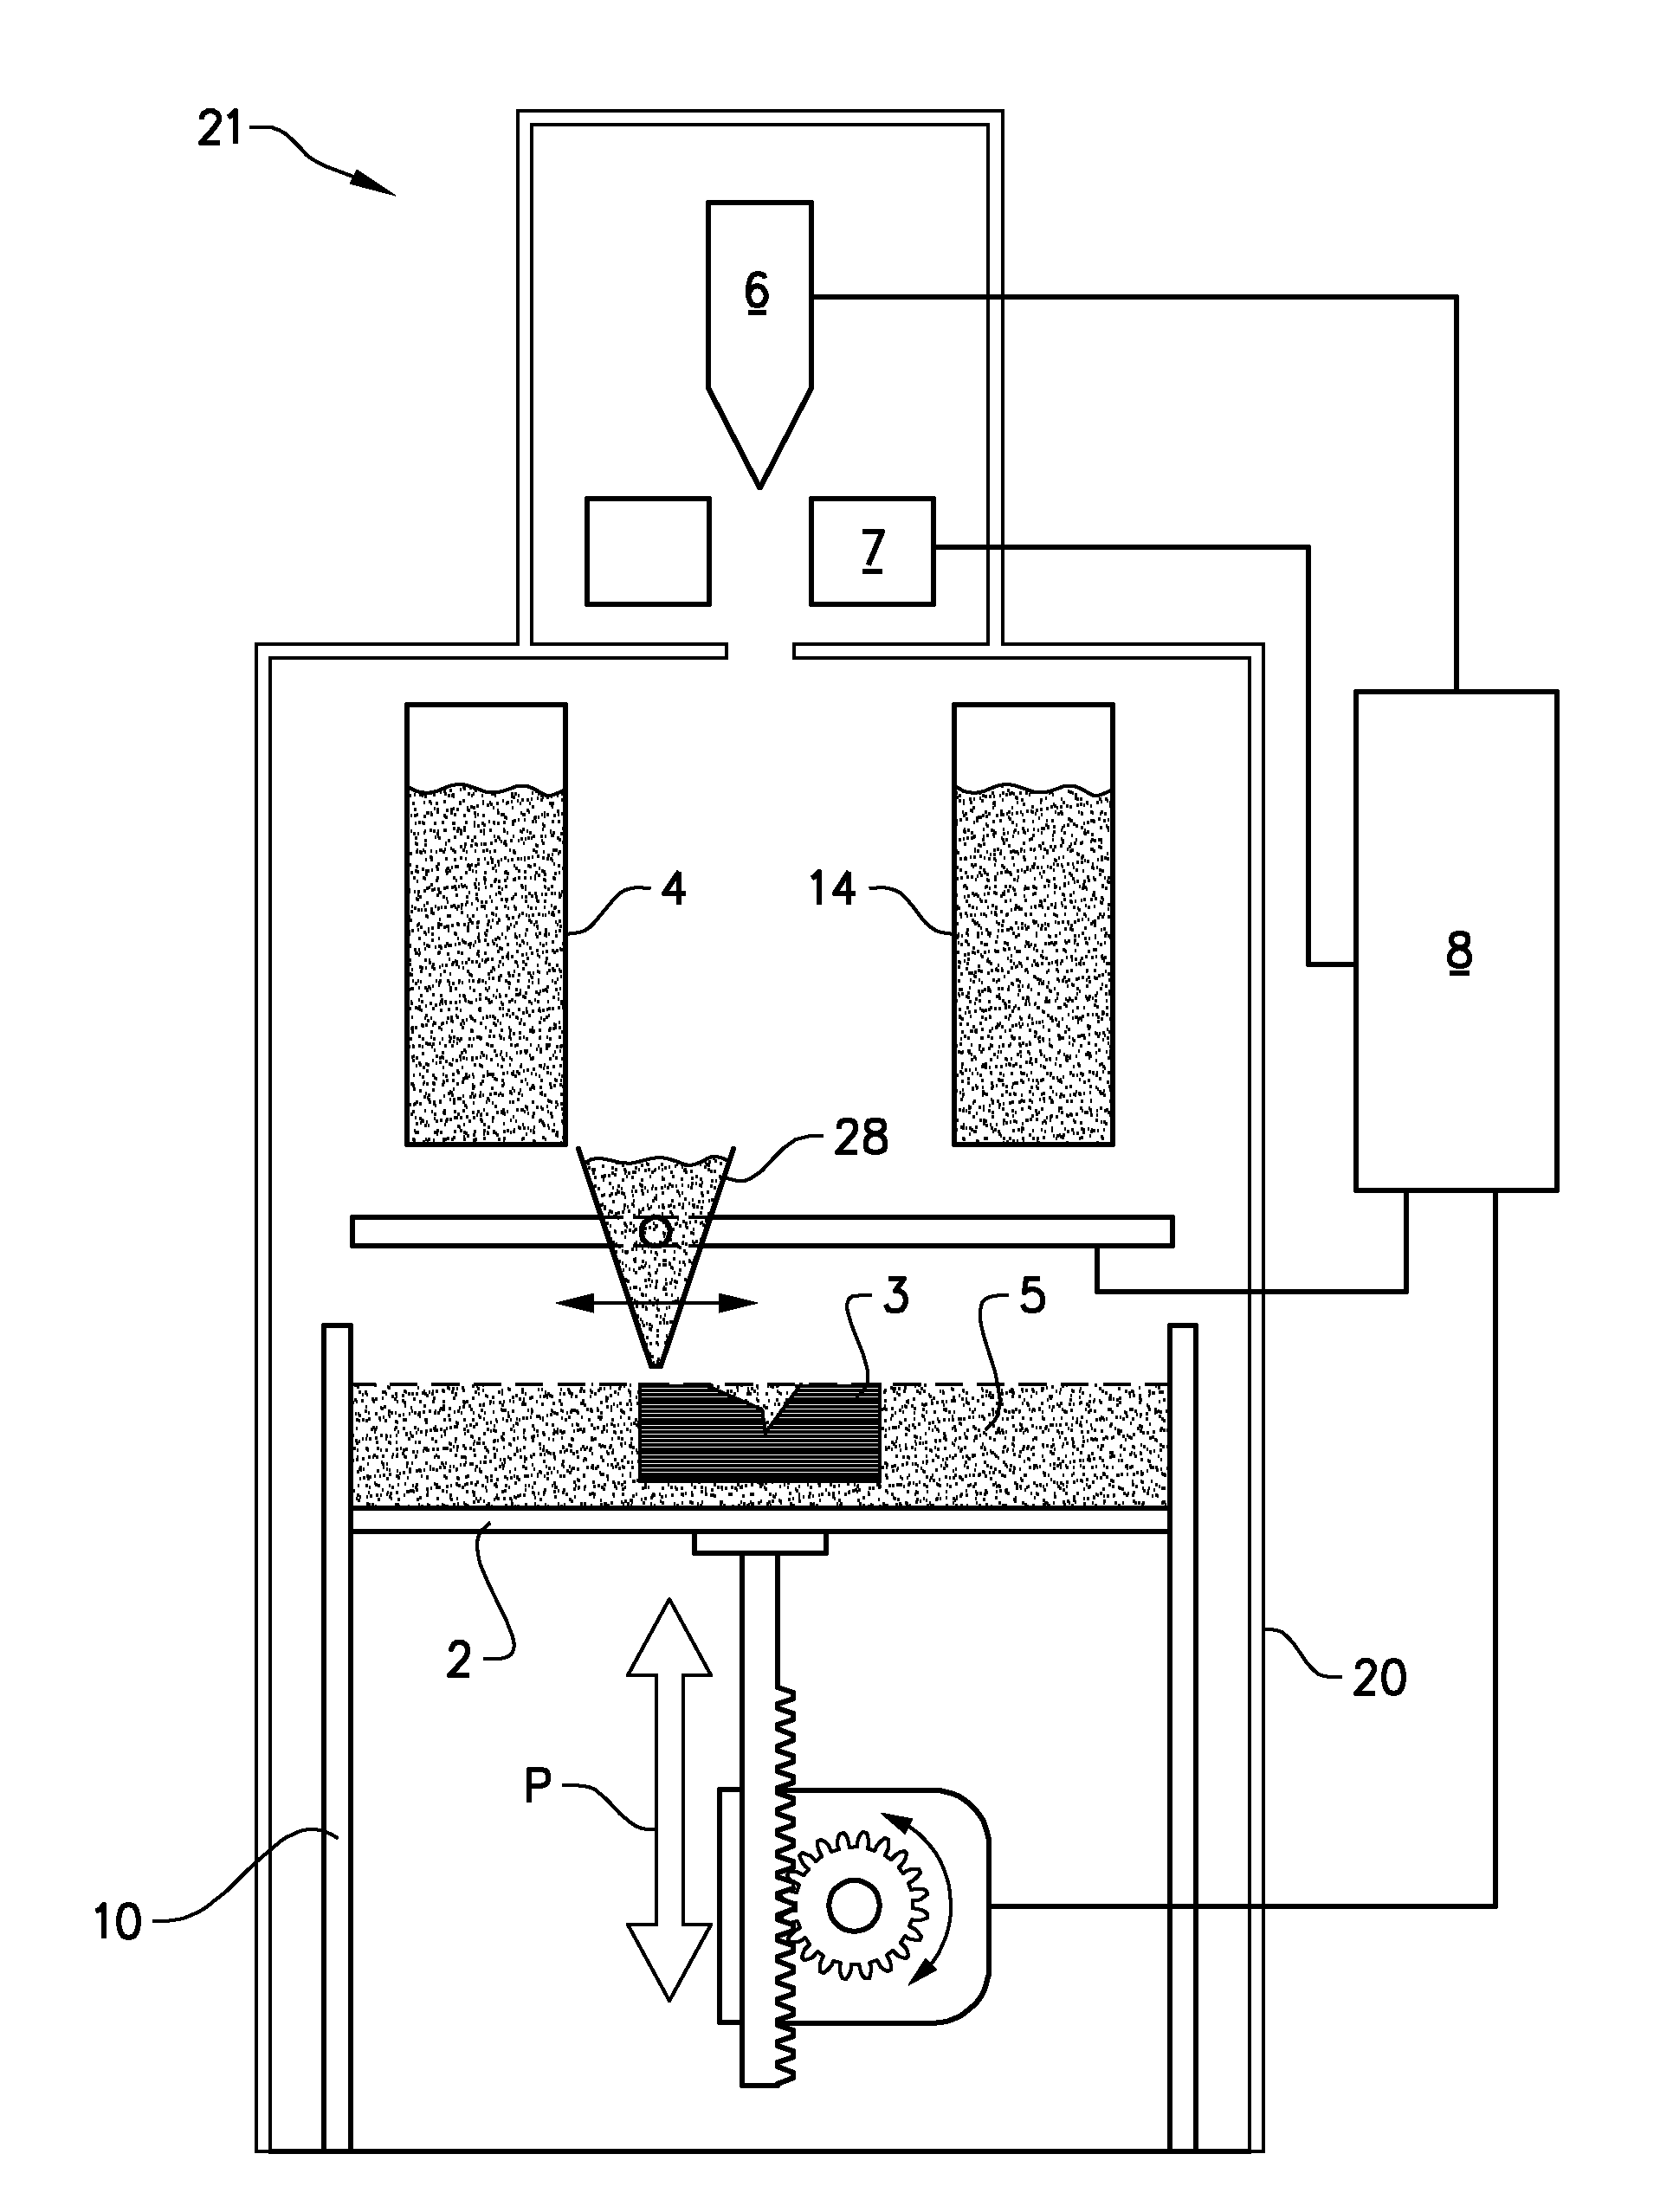 Powder distribution in additive manufacturing of three-dimensional articles